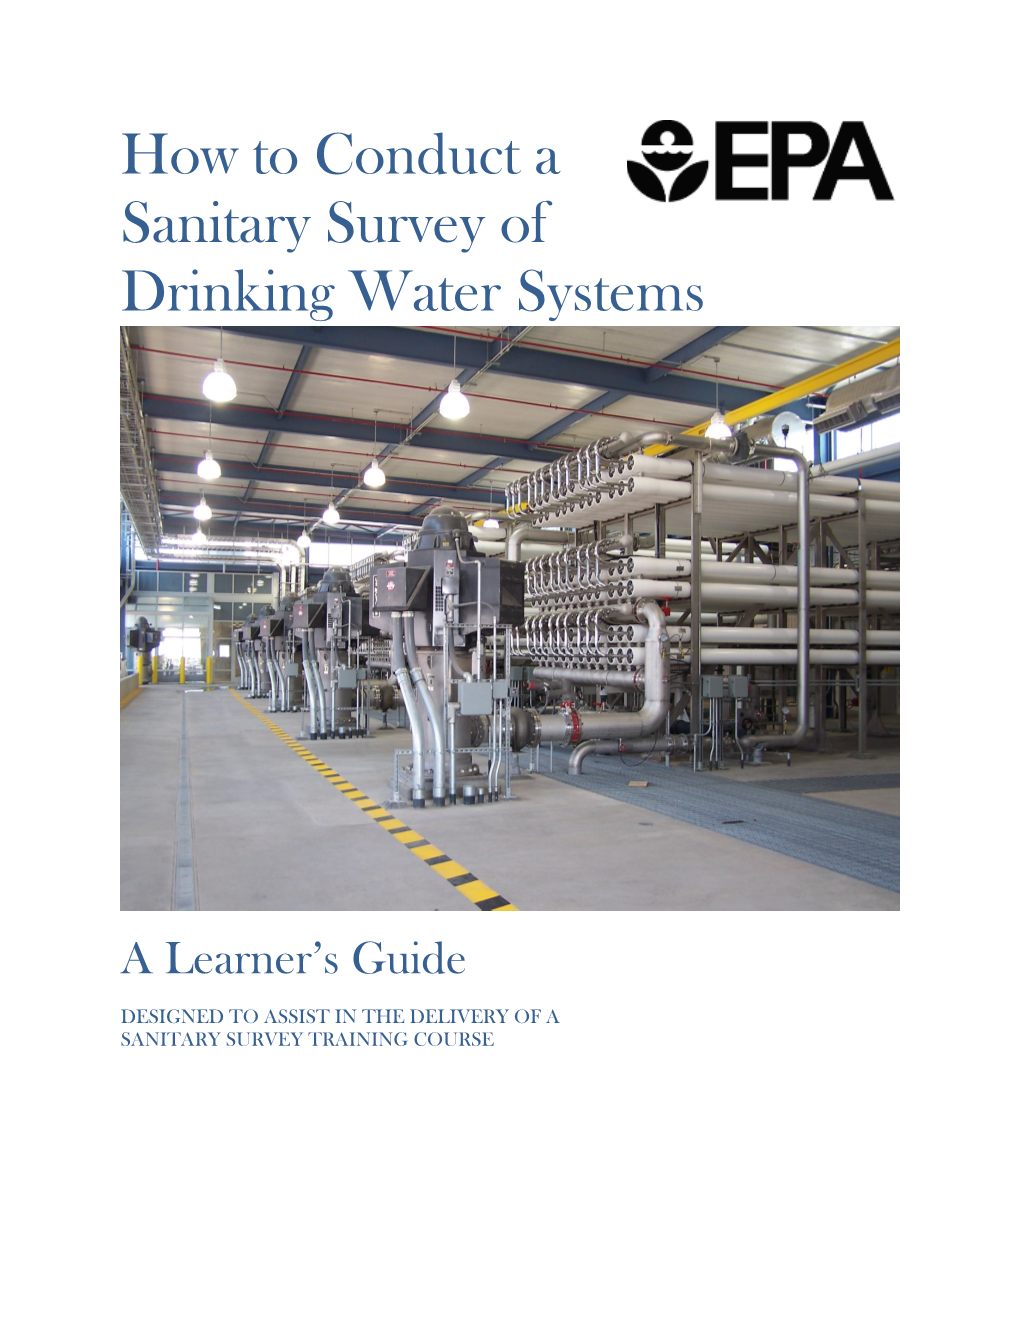 How to Conduct a Sanitary Survey of Drinking Water Systems